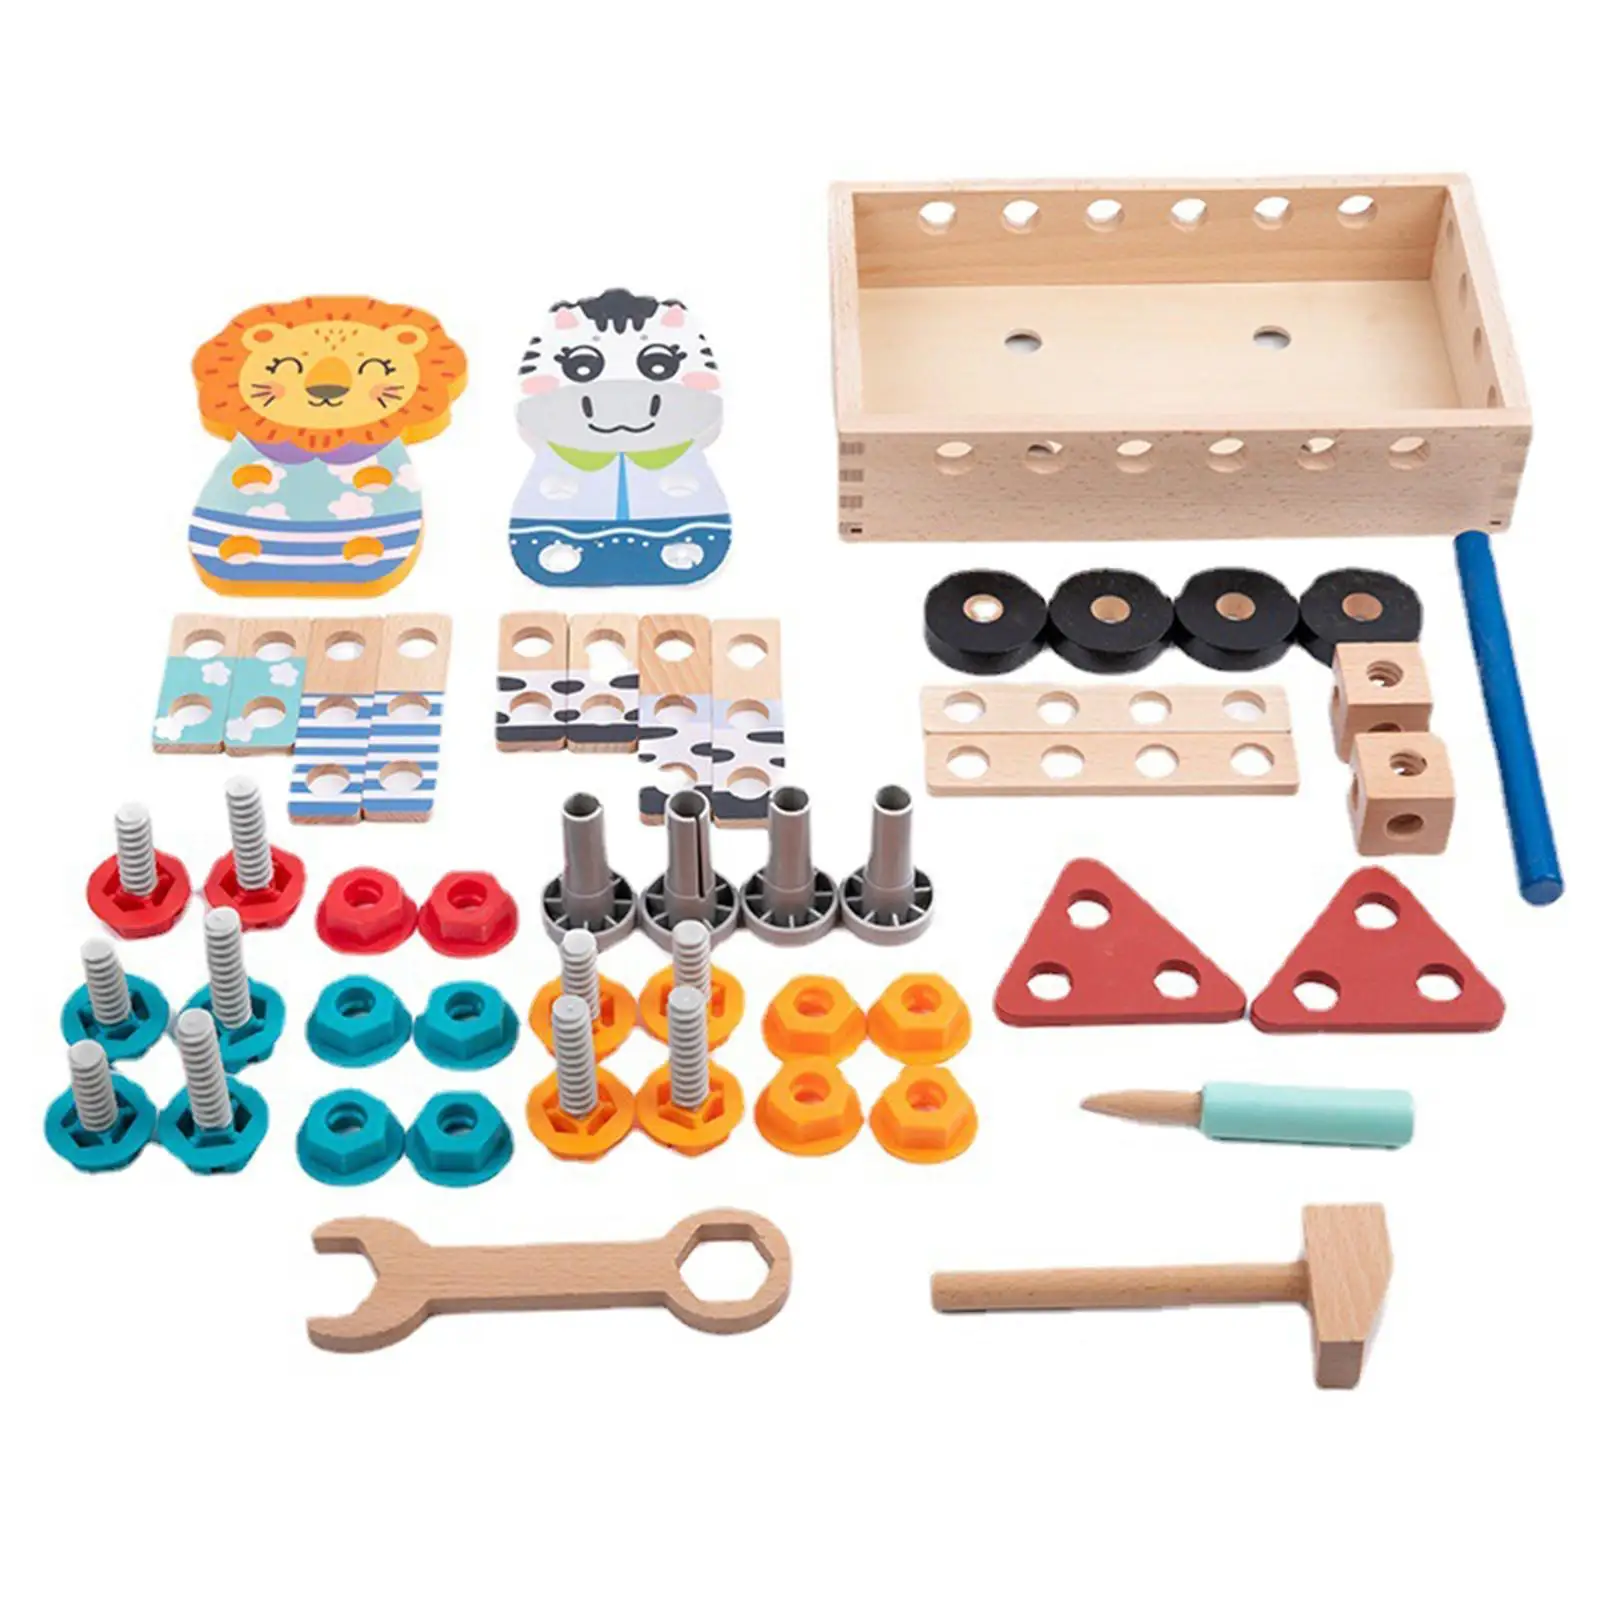 Pretend Game Toolbox DIY Construction Toy for Role education Preschool